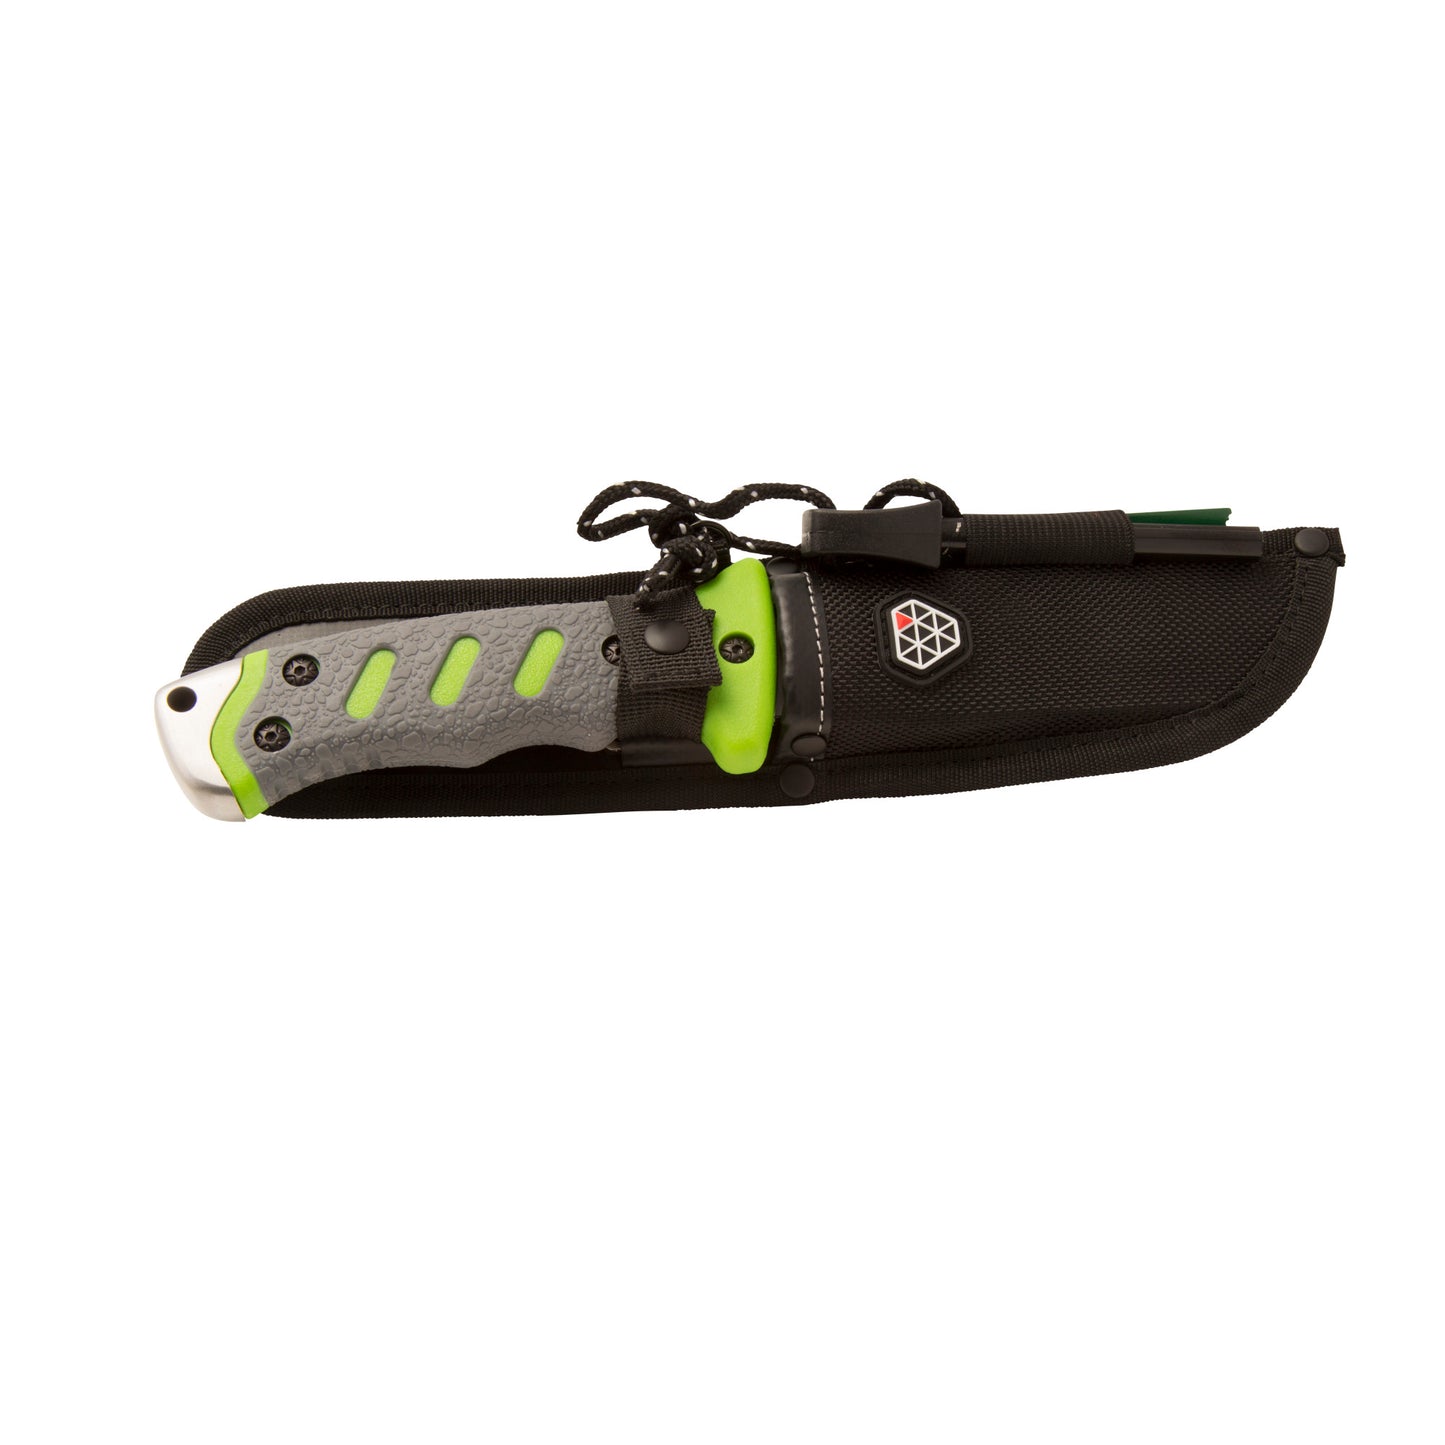 Outdoor Survival Knife with Fixed 4.5-Inch Partially Serrated 420 Stainless Blade and Sheath, Survival Tools